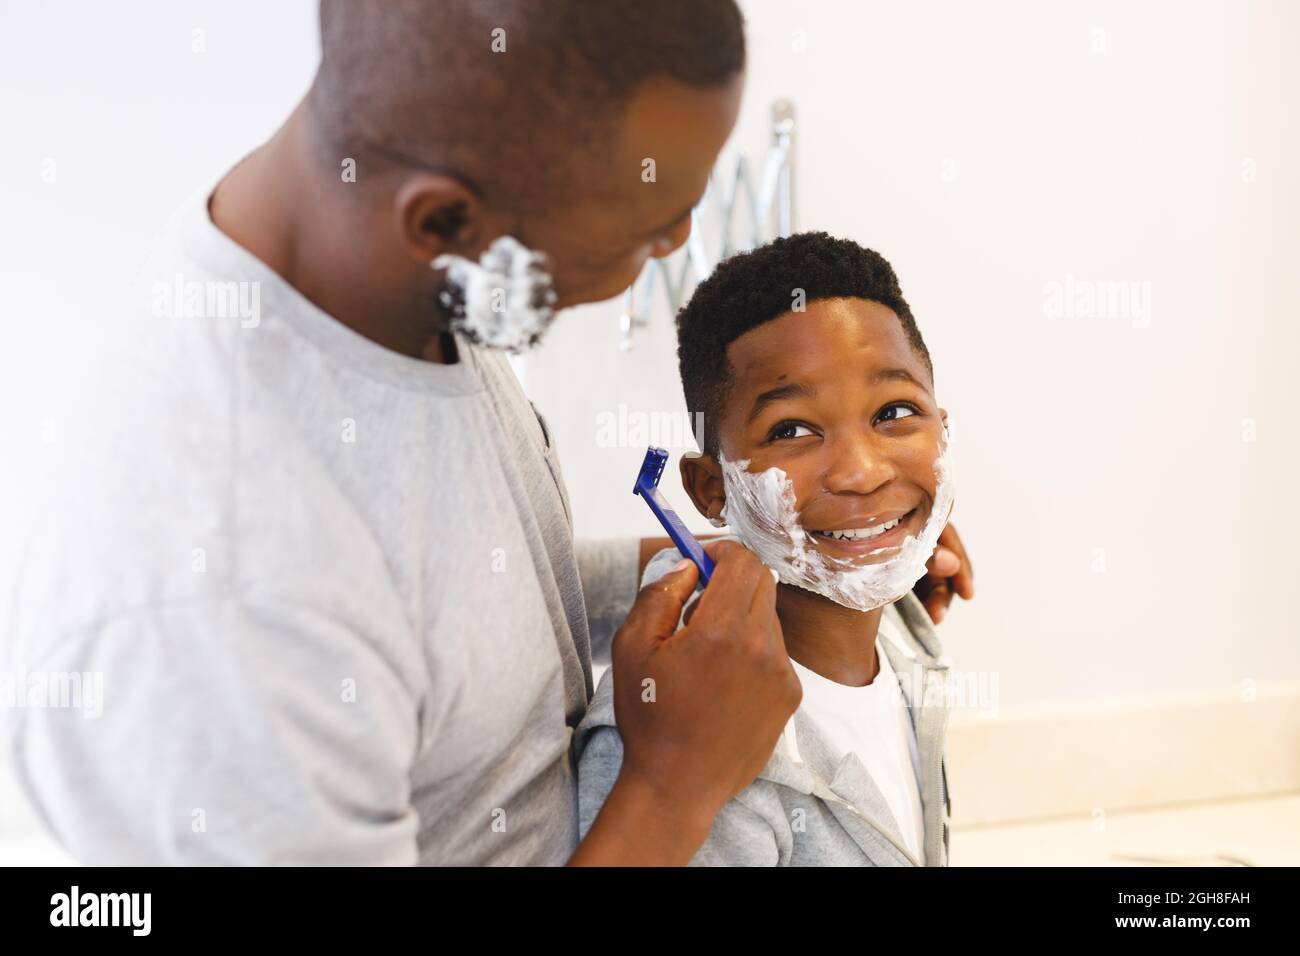 African american father with son having fun pretending to shave in bathroom Stock Photo